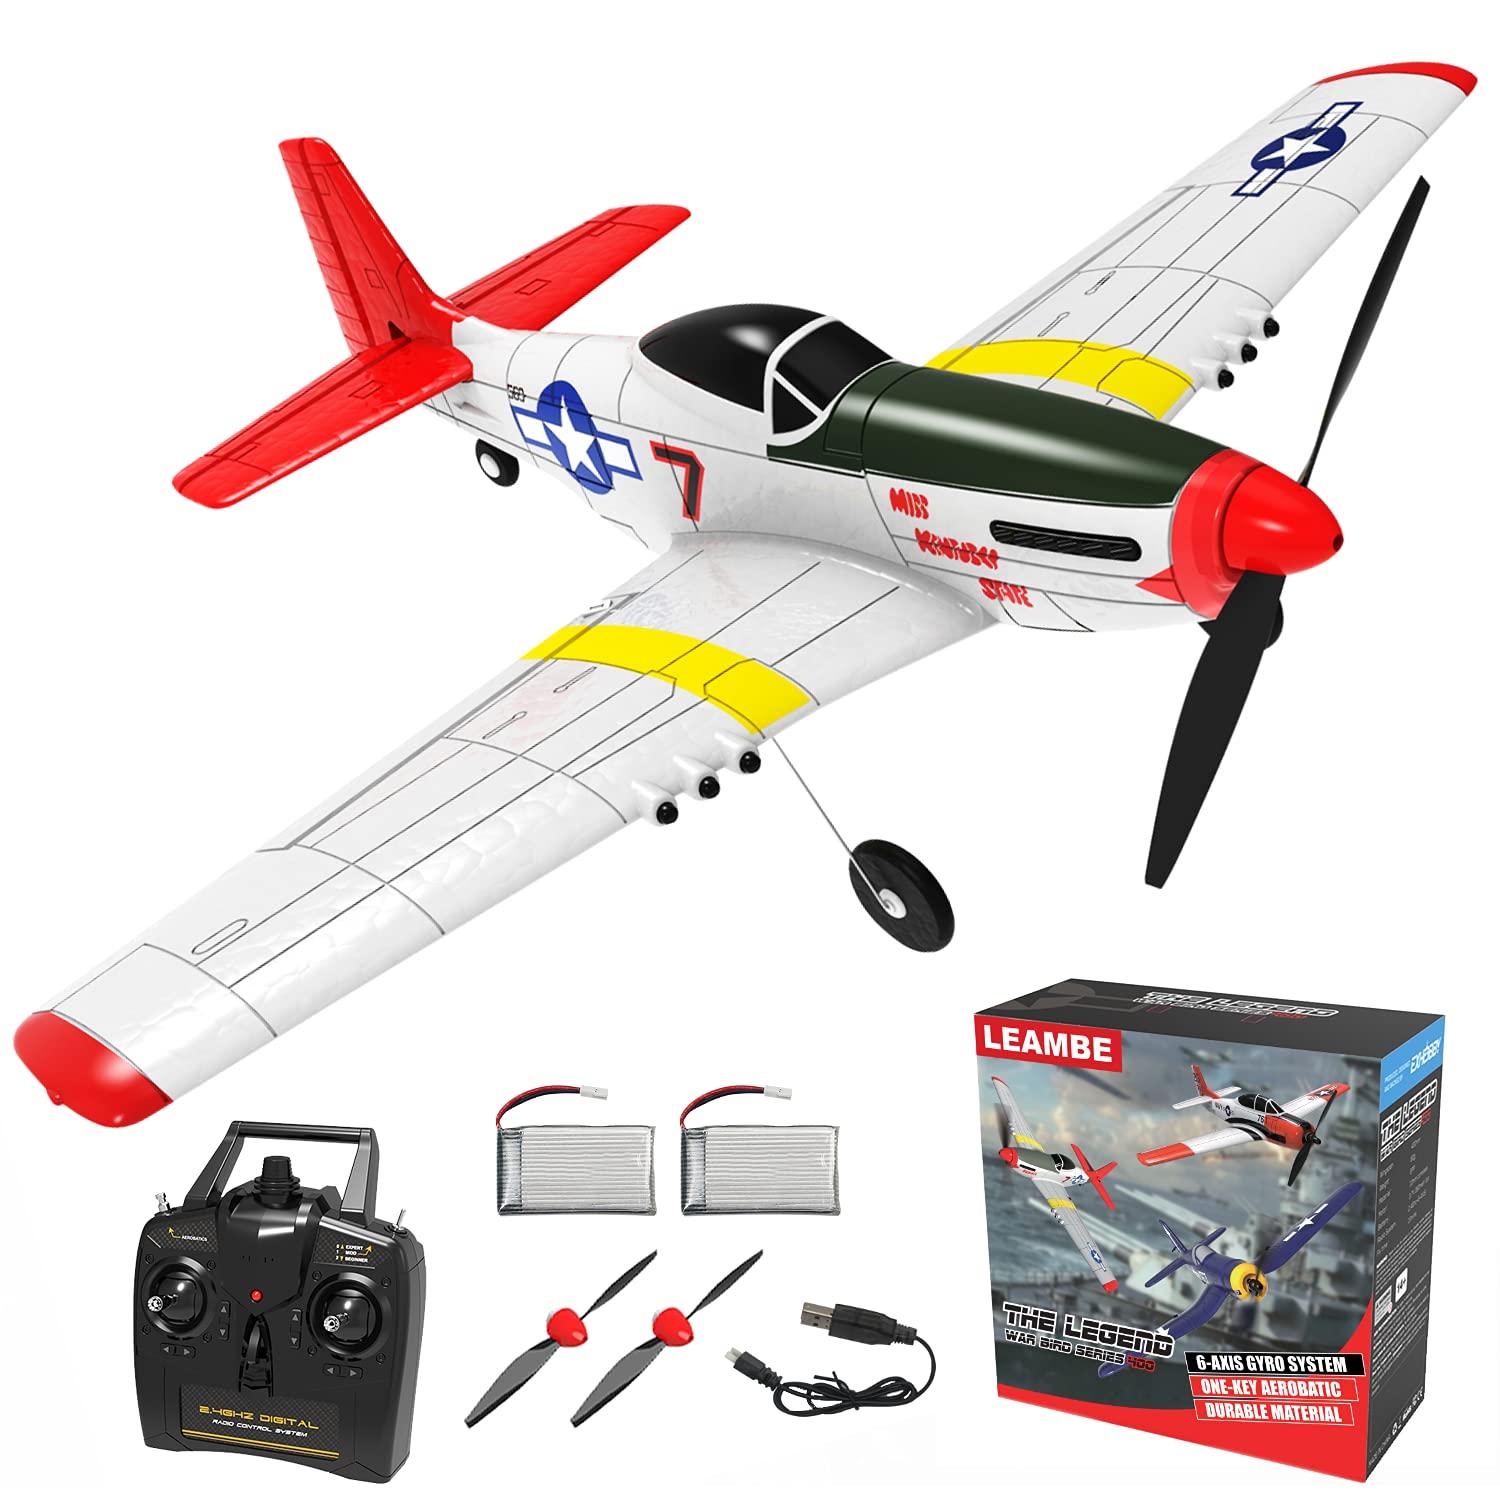 Rc Airplanes For Beginners:  Trainers: Introduction to RC airplanes for beginners.